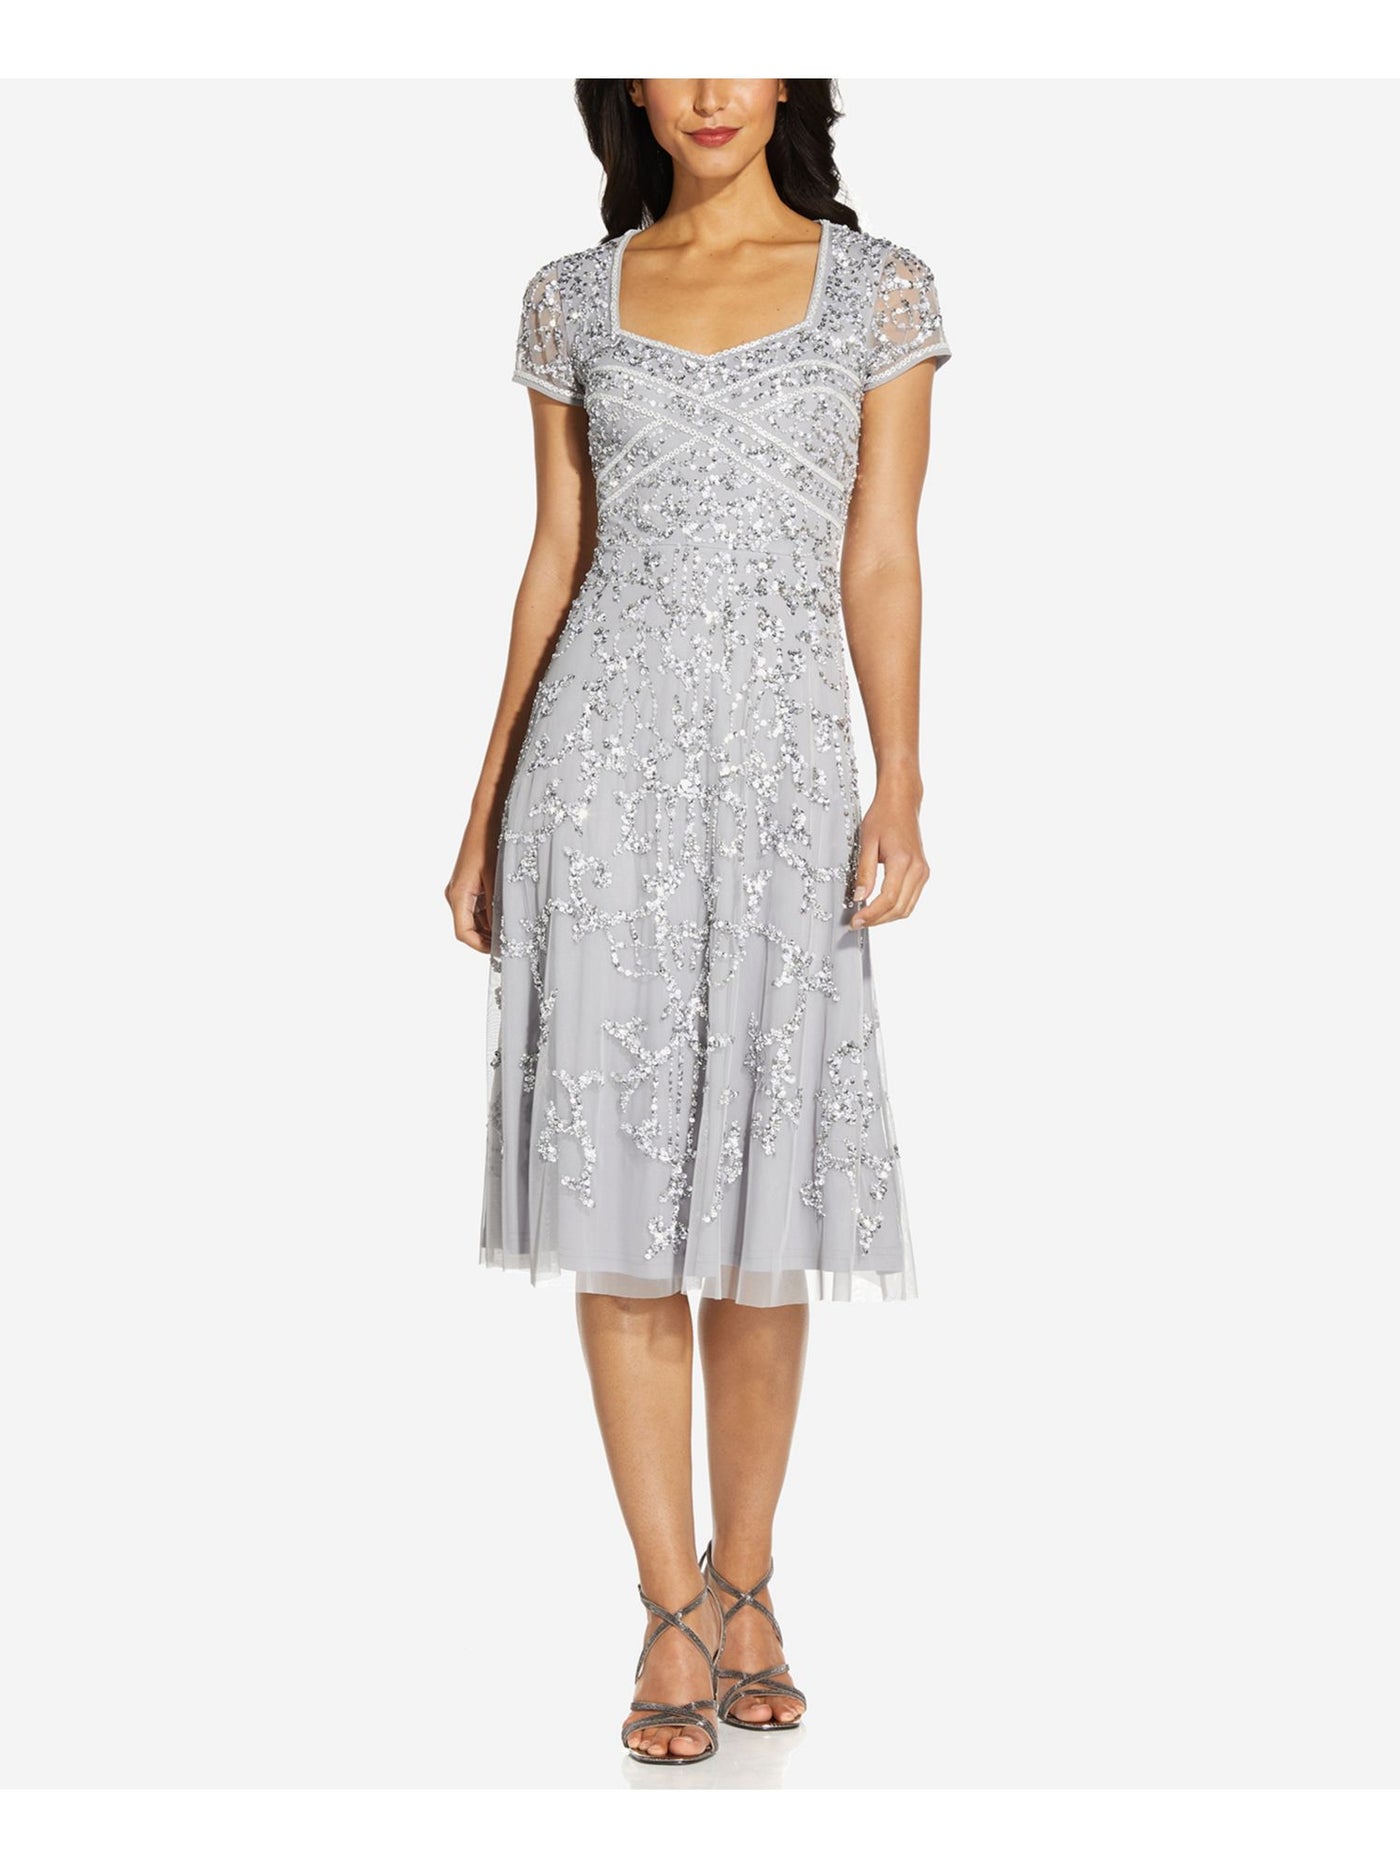 ADRIANNA PAPELL Womens Embellished Zippered Cap Sleeve Queen Anne Neckline Below The Knee Formal Fit + Flare Dress